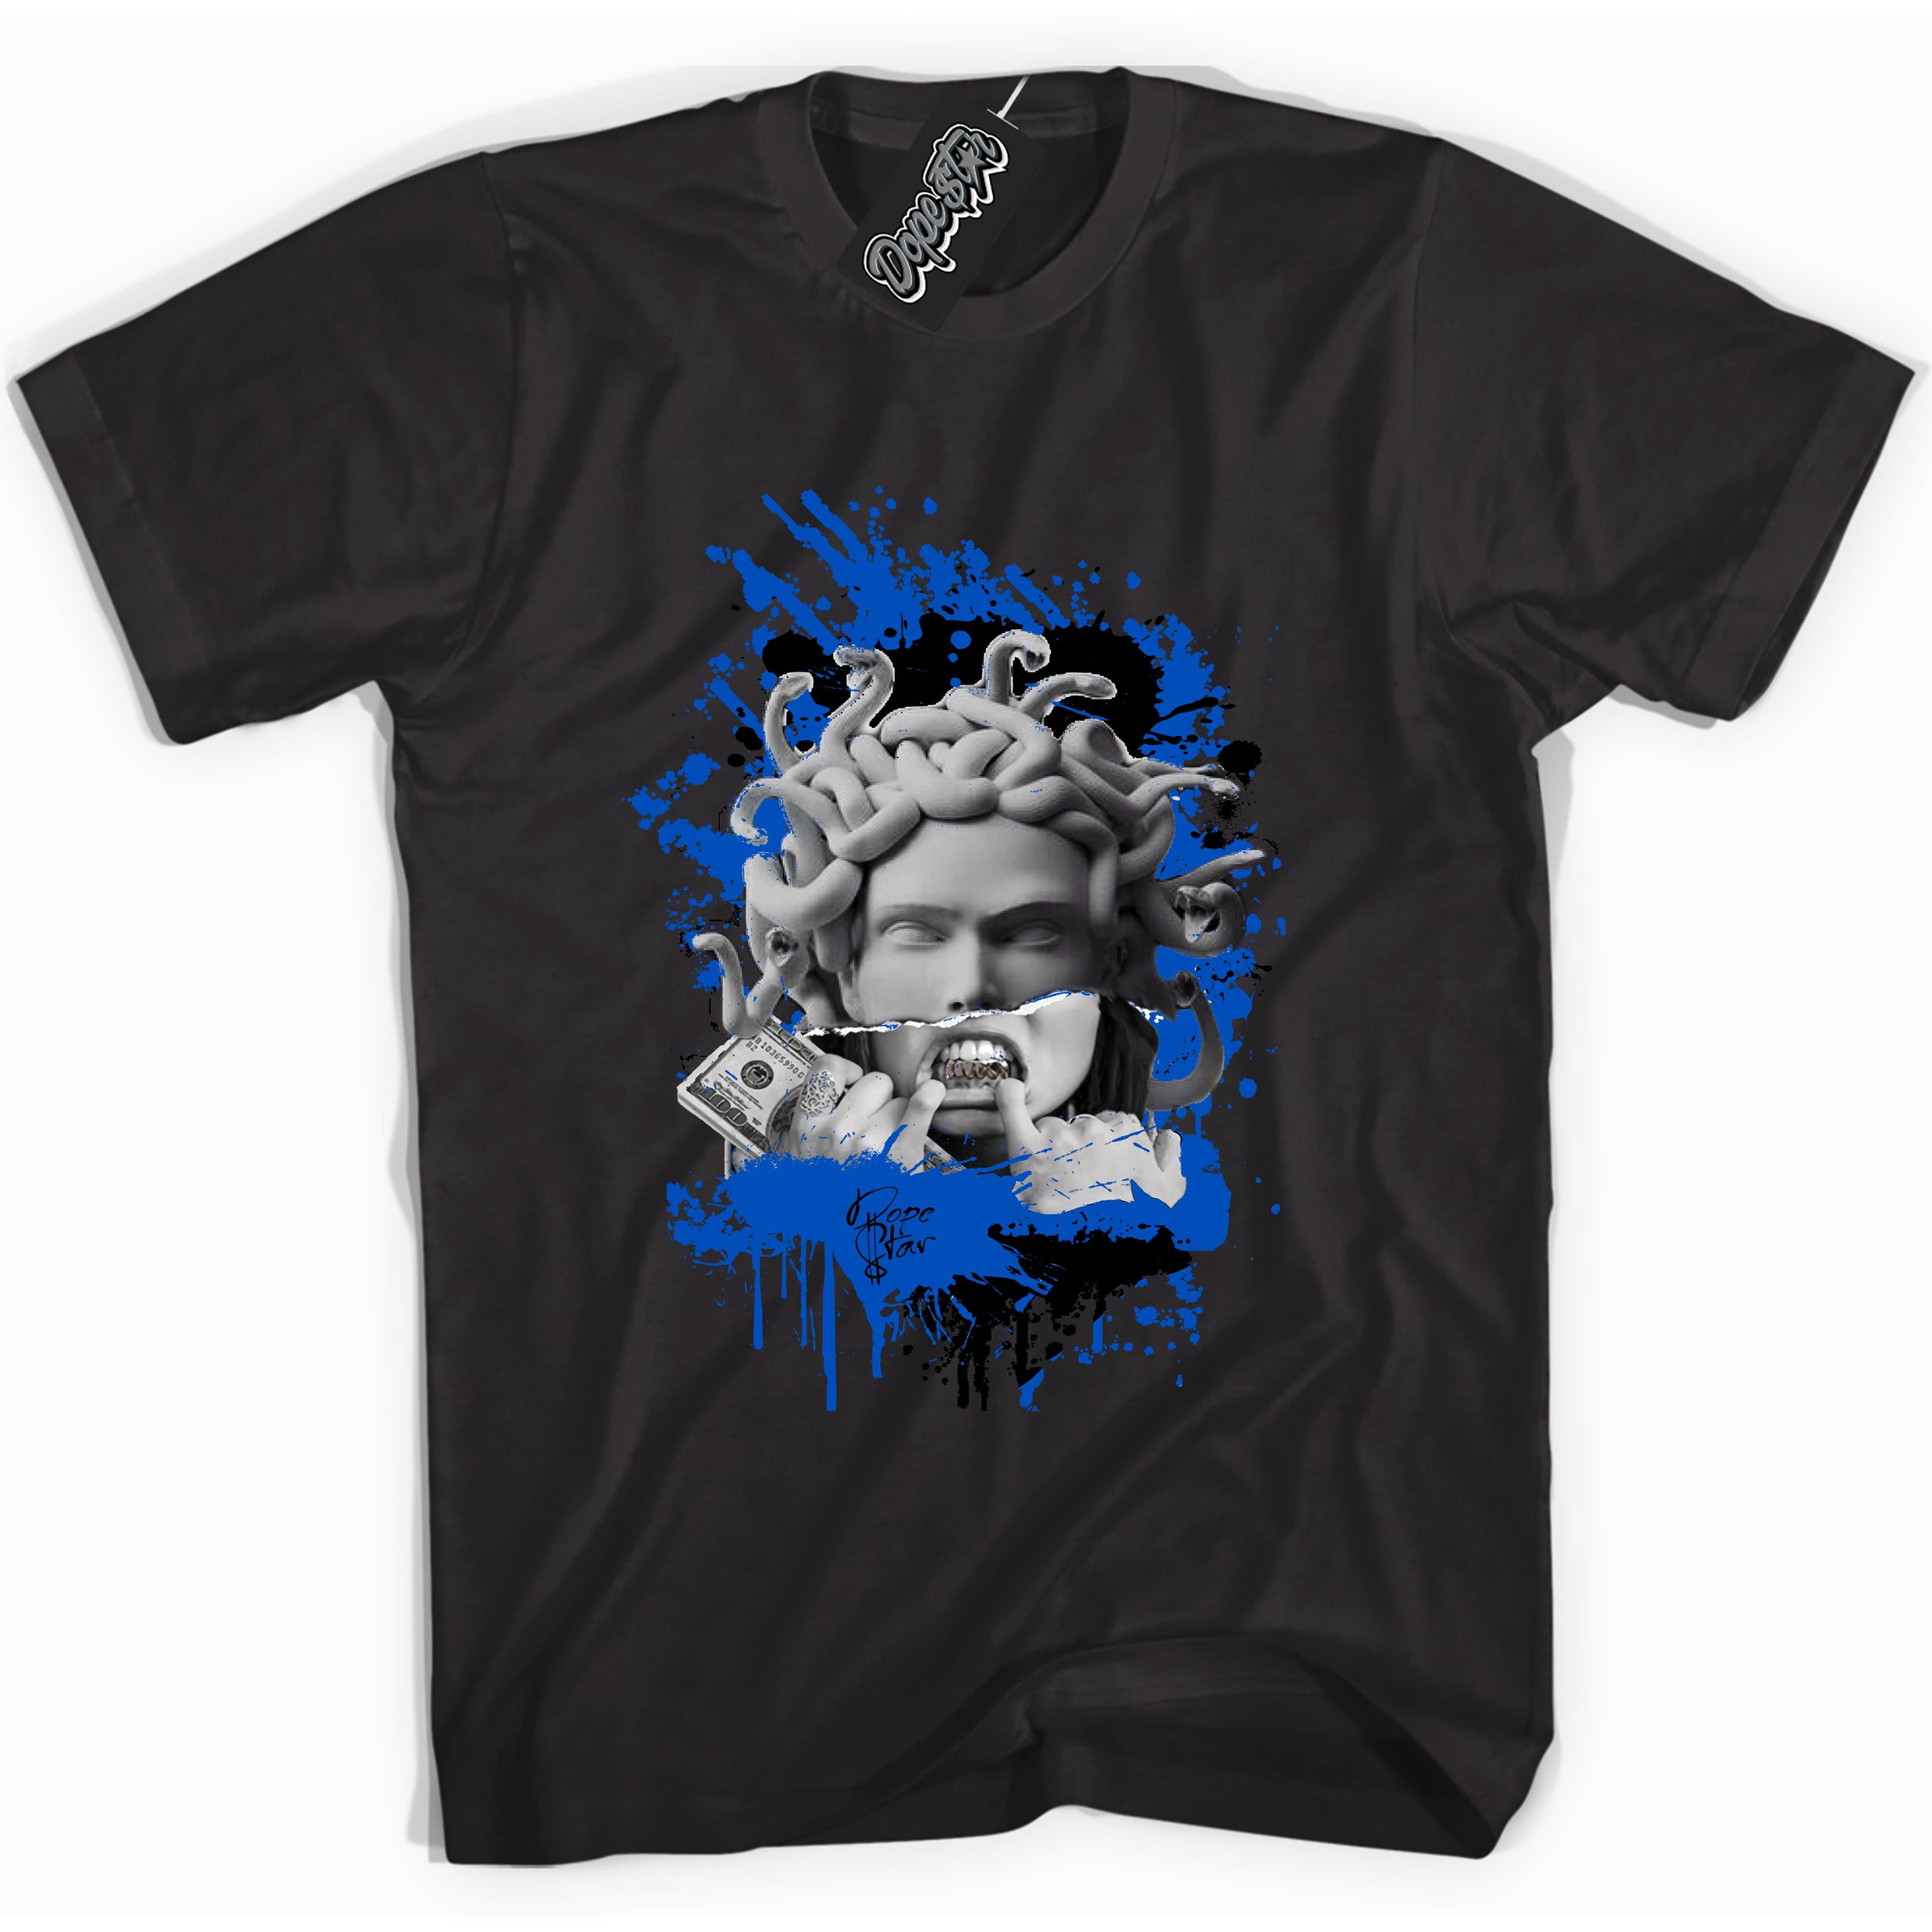 Cool Black graphic tee with "Medusa" design, that perfectly matches Royal Reimagined 1s sneakers 